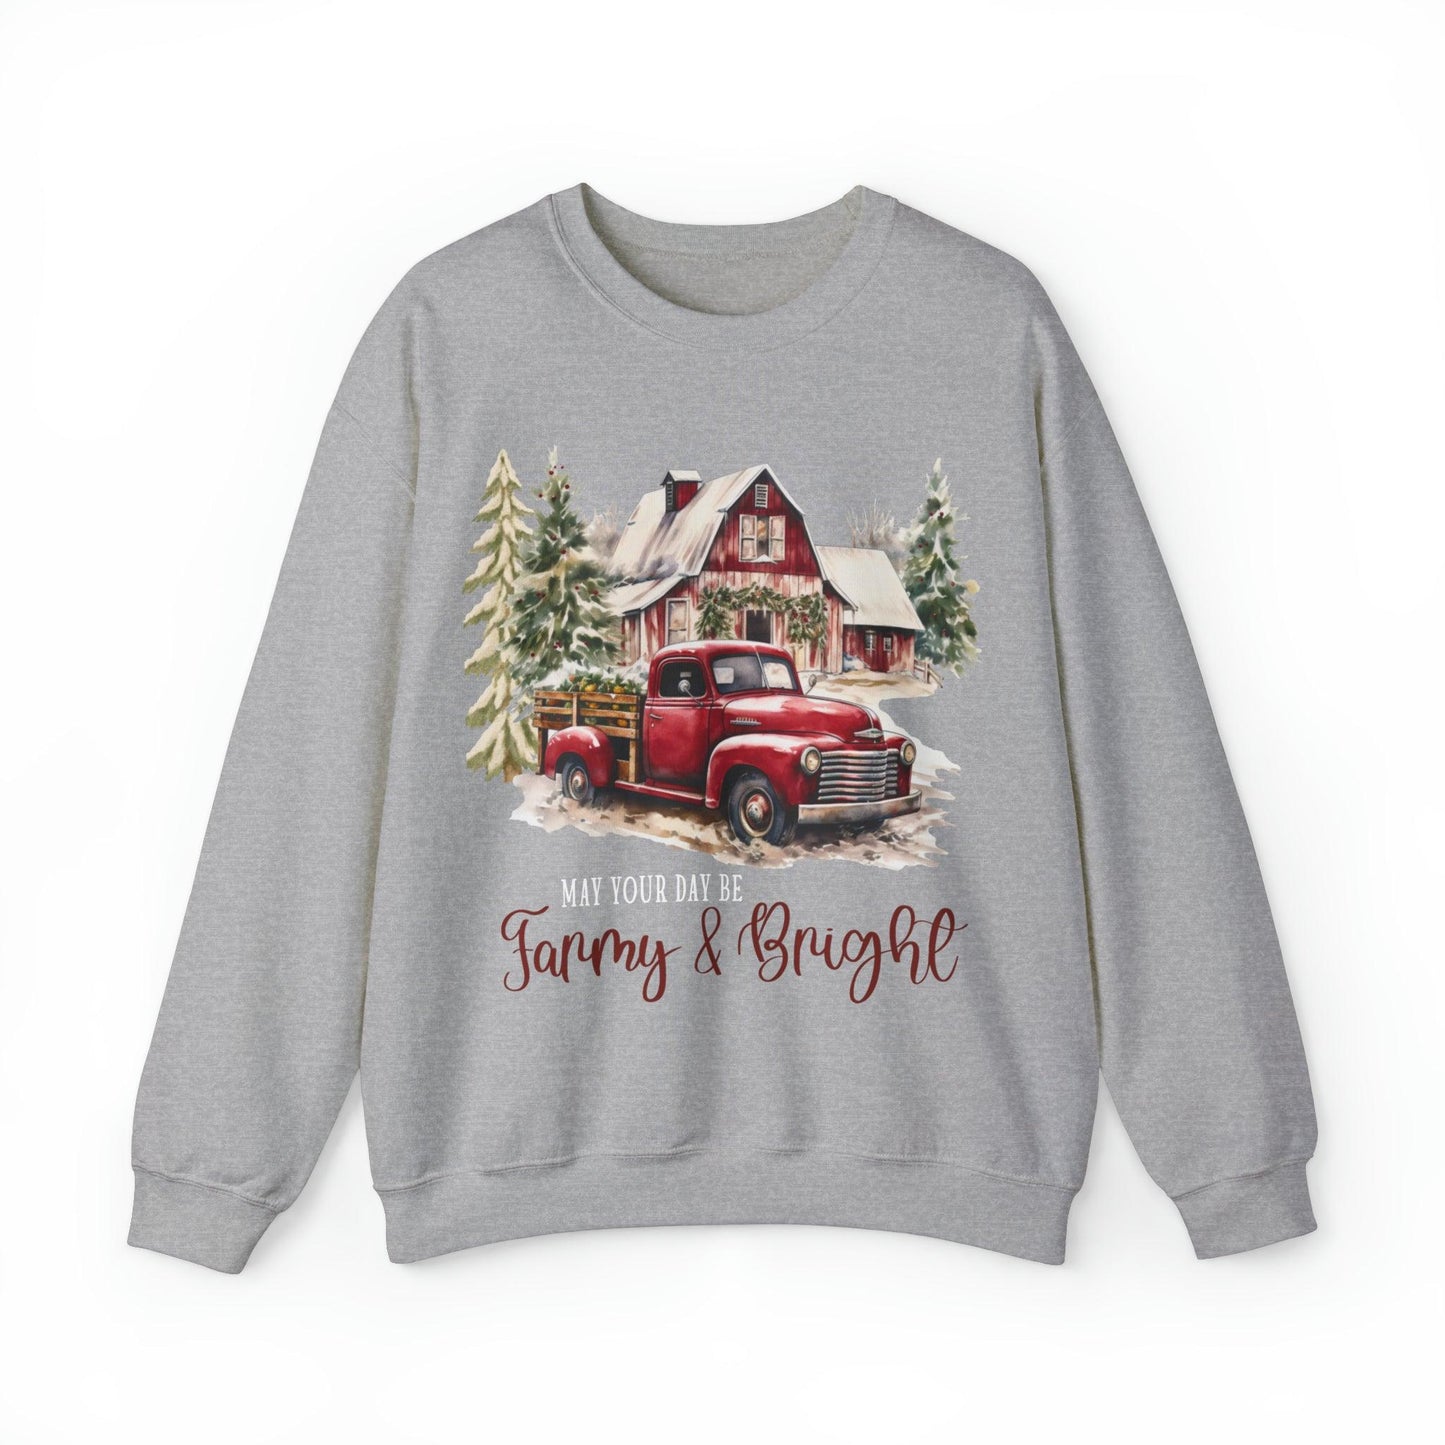 May Your Day Be Farmy And Bright Christmas Sweatshirt Christmas on The Farm Sweatshirt Christmas Farm Sweatshirt Christmas Sweater Trendy Christmas Shirt Farmers - Giftsmojo